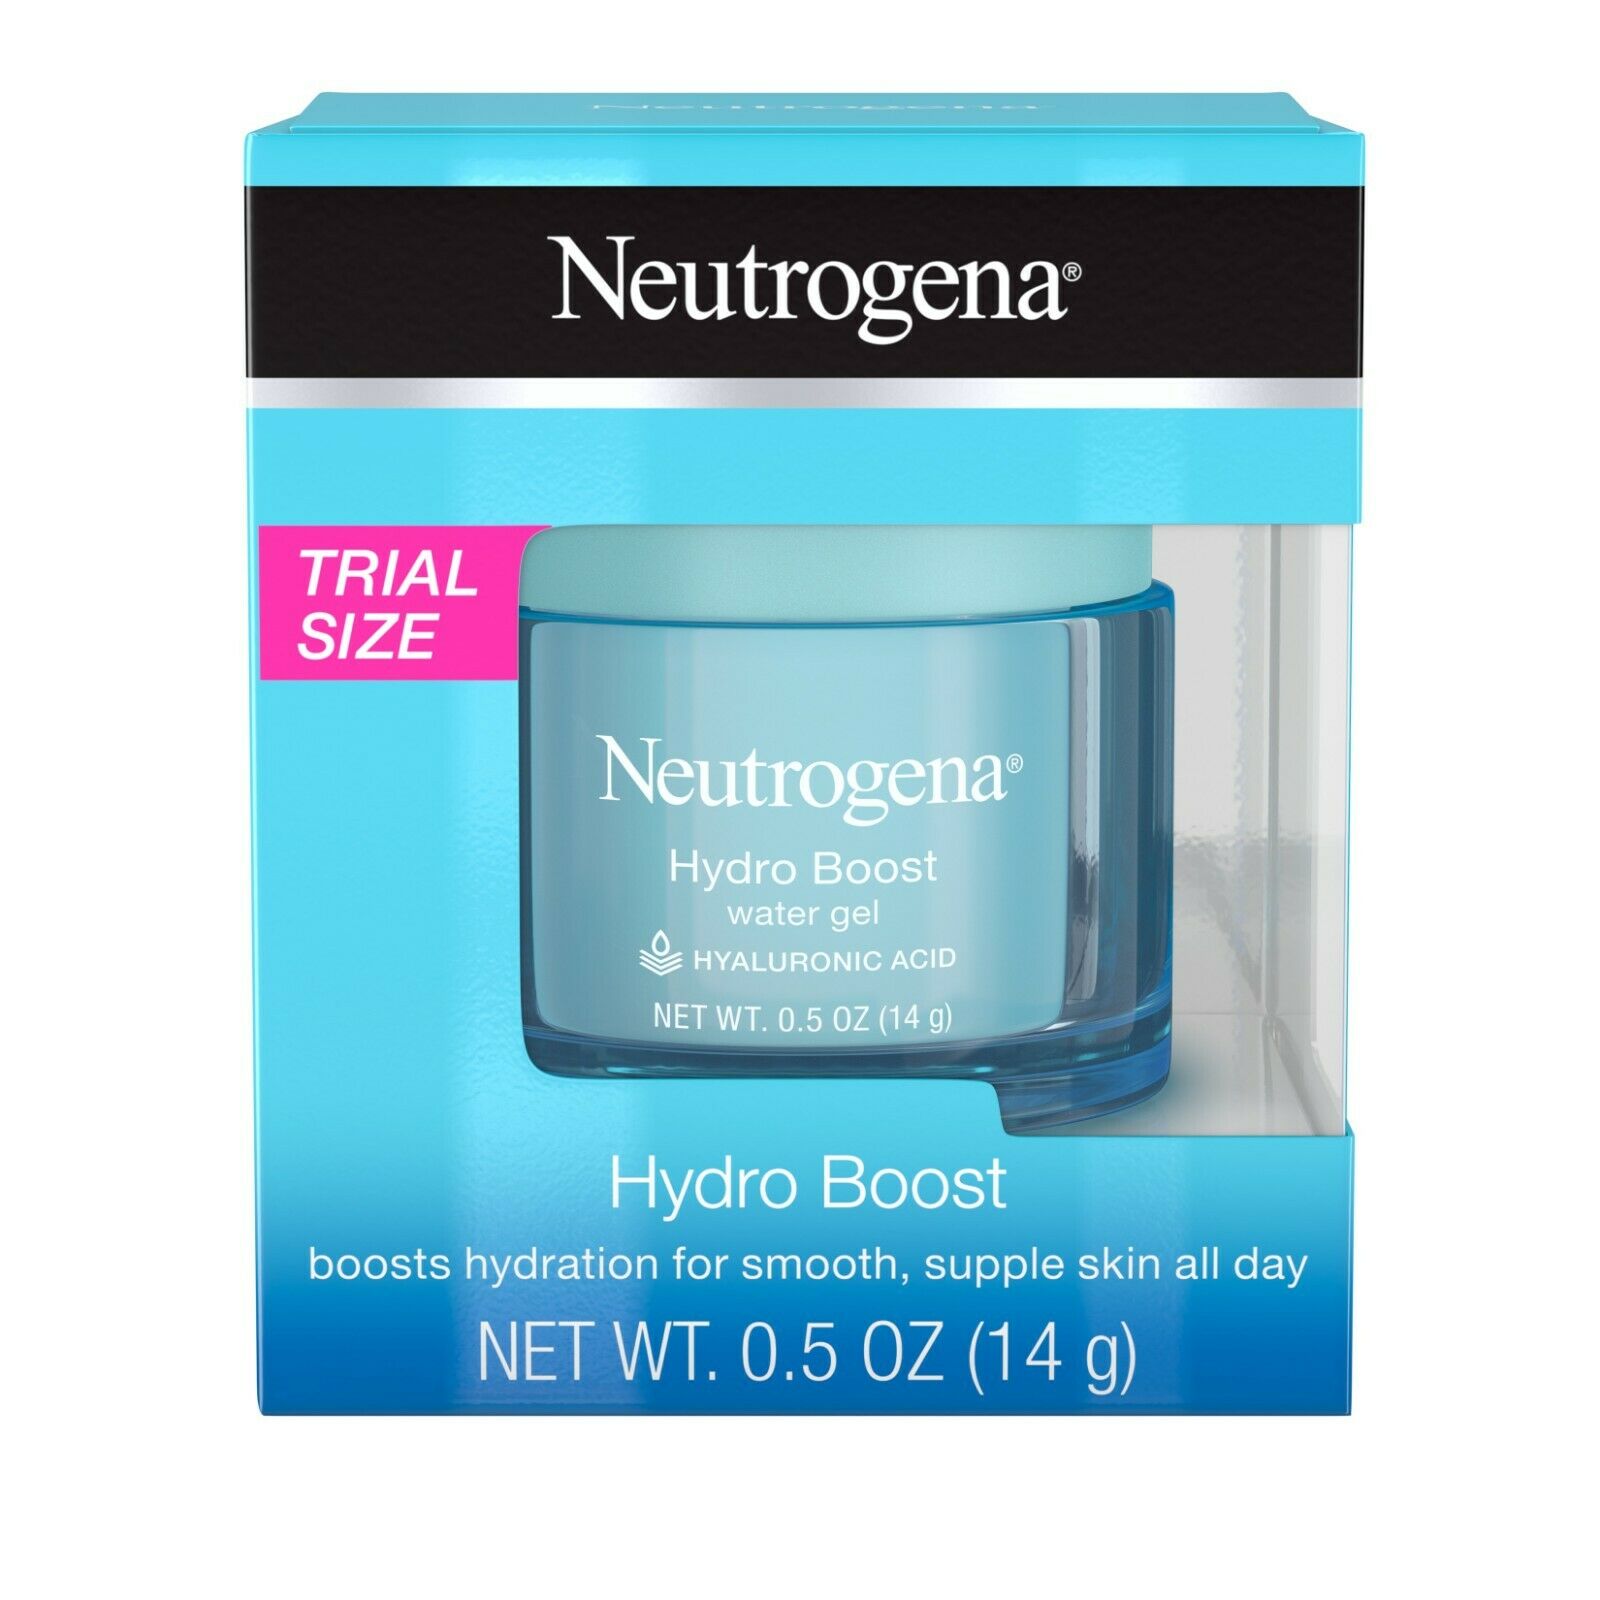 Neutrogena Hydro Boost Hyaluronic Acid Hydrating Water Face Gel Moisturizer for Dry Skin, Oil-Free, Non Comedog (Pack of 2) - image 1 of 6